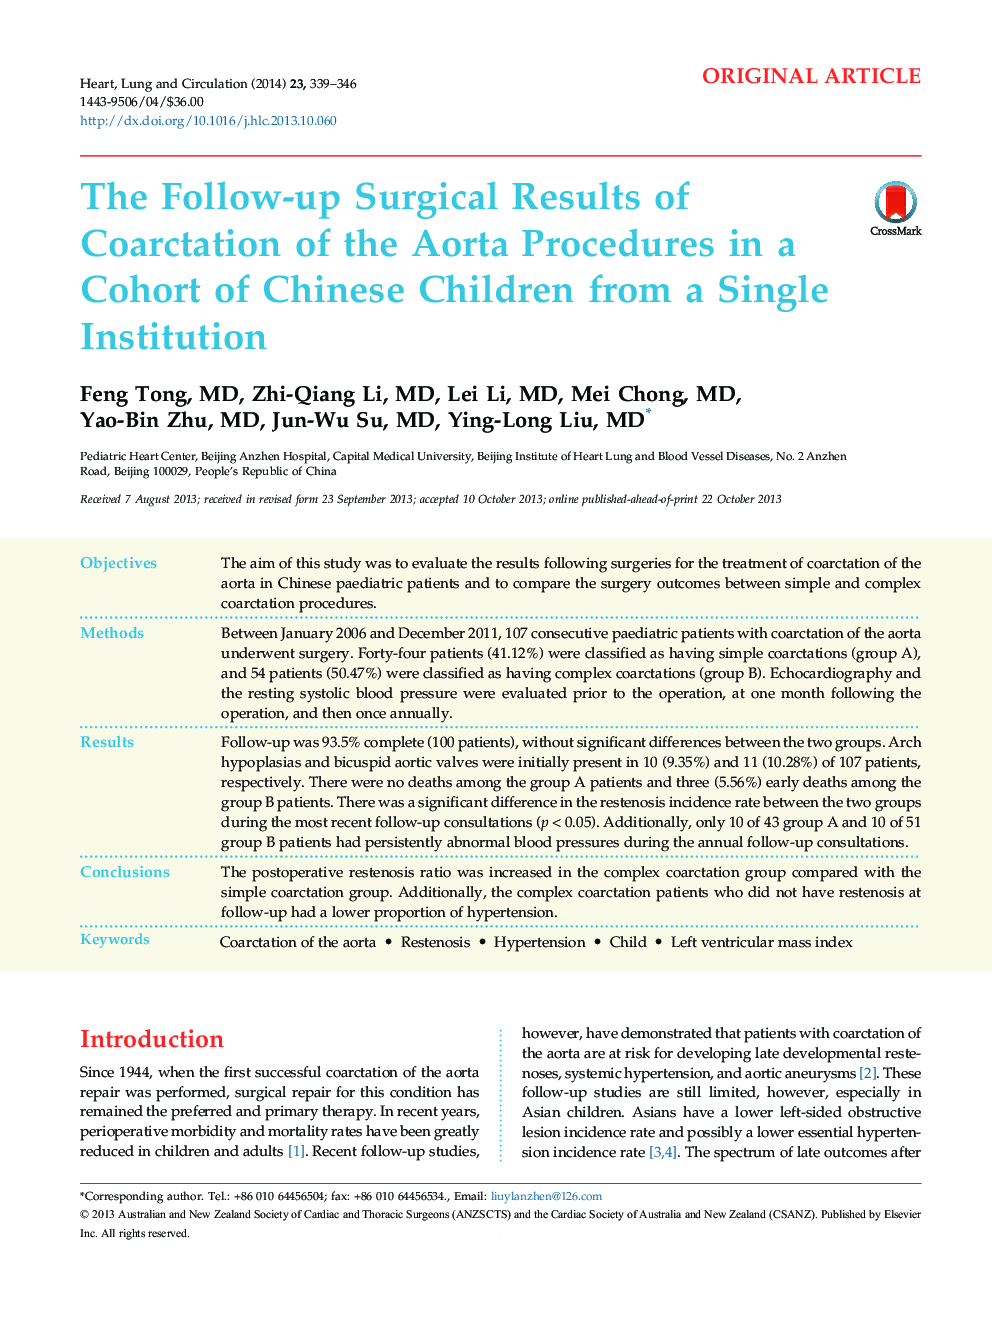 The Follow-up Surgical Results of Coarctation of the Aorta Procedures in a Cohort of Chinese Children from a Single Institution